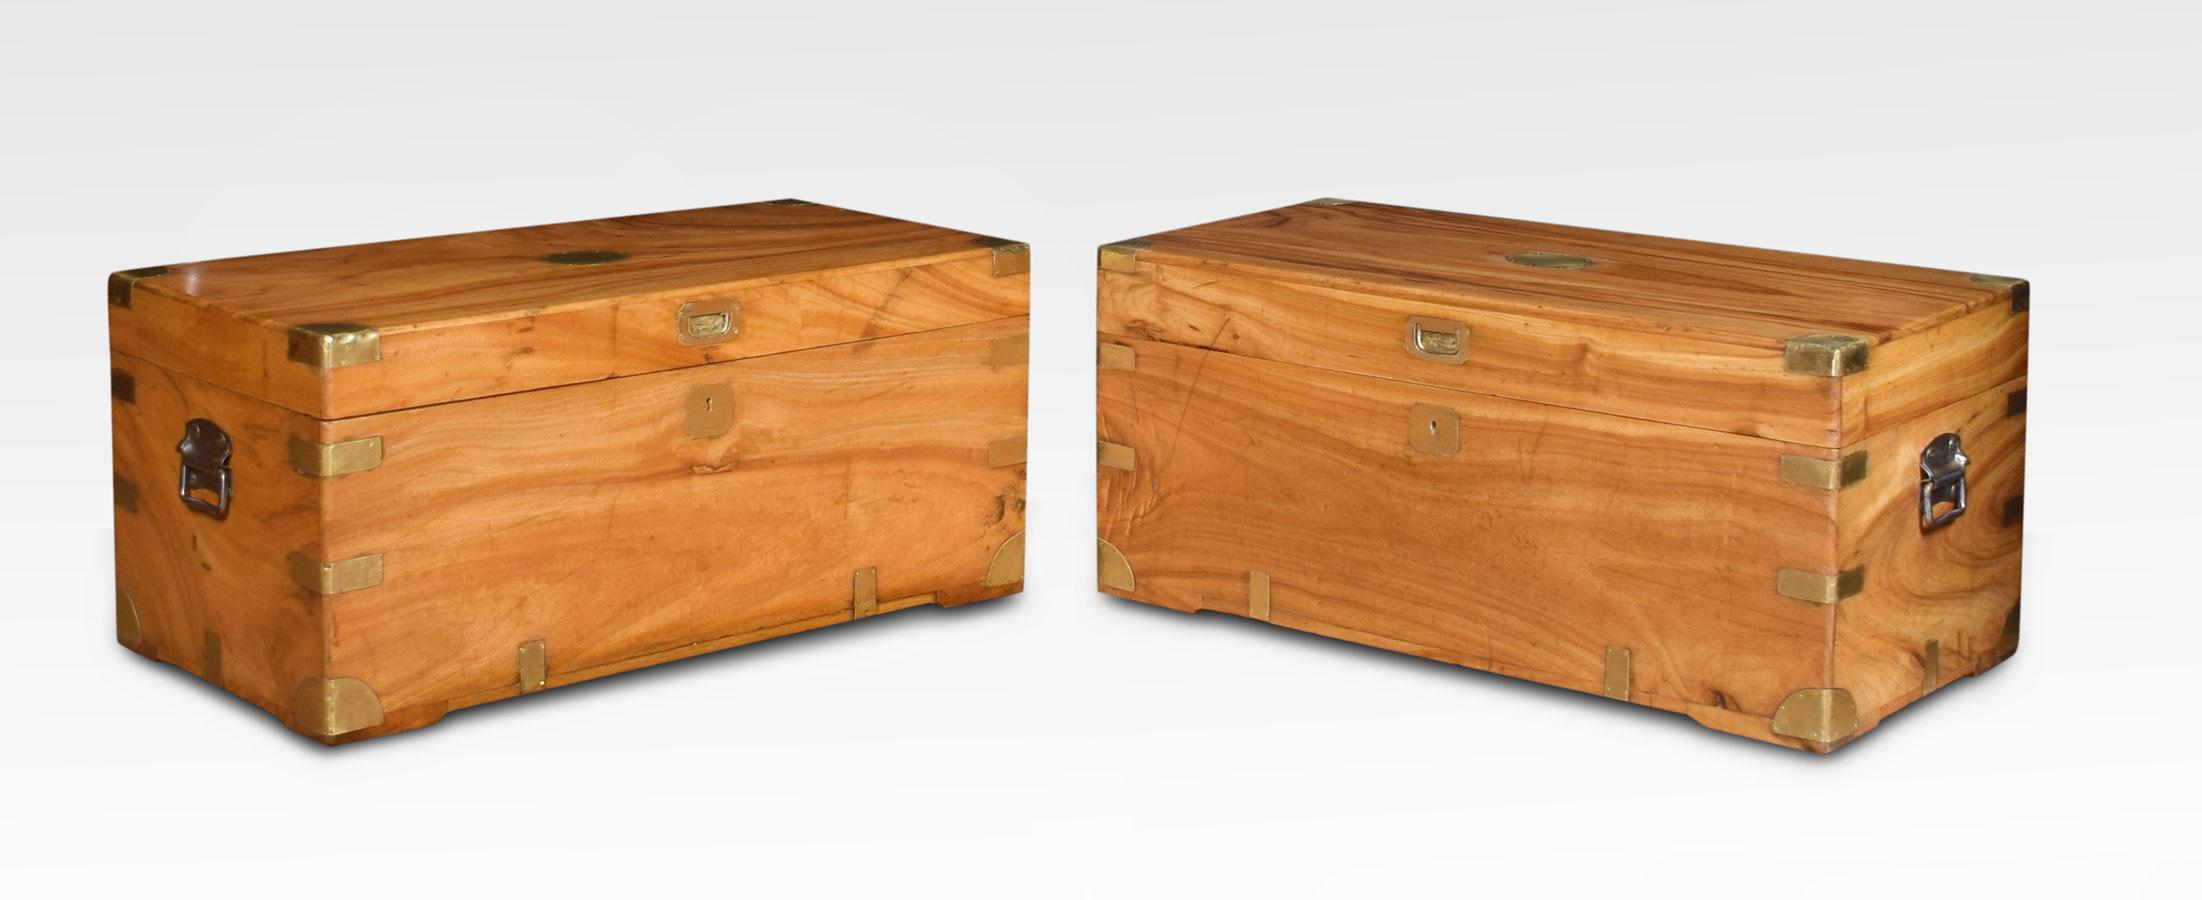 Near pair of Chinese export brass-bound camphorwood chest. The large rectangular hinged tops opening to reveal large storage area with brass straps and side-carrying handles.
Dimensions:
Height 16 inches
Width 35.5 inches
Depth 17 inches.